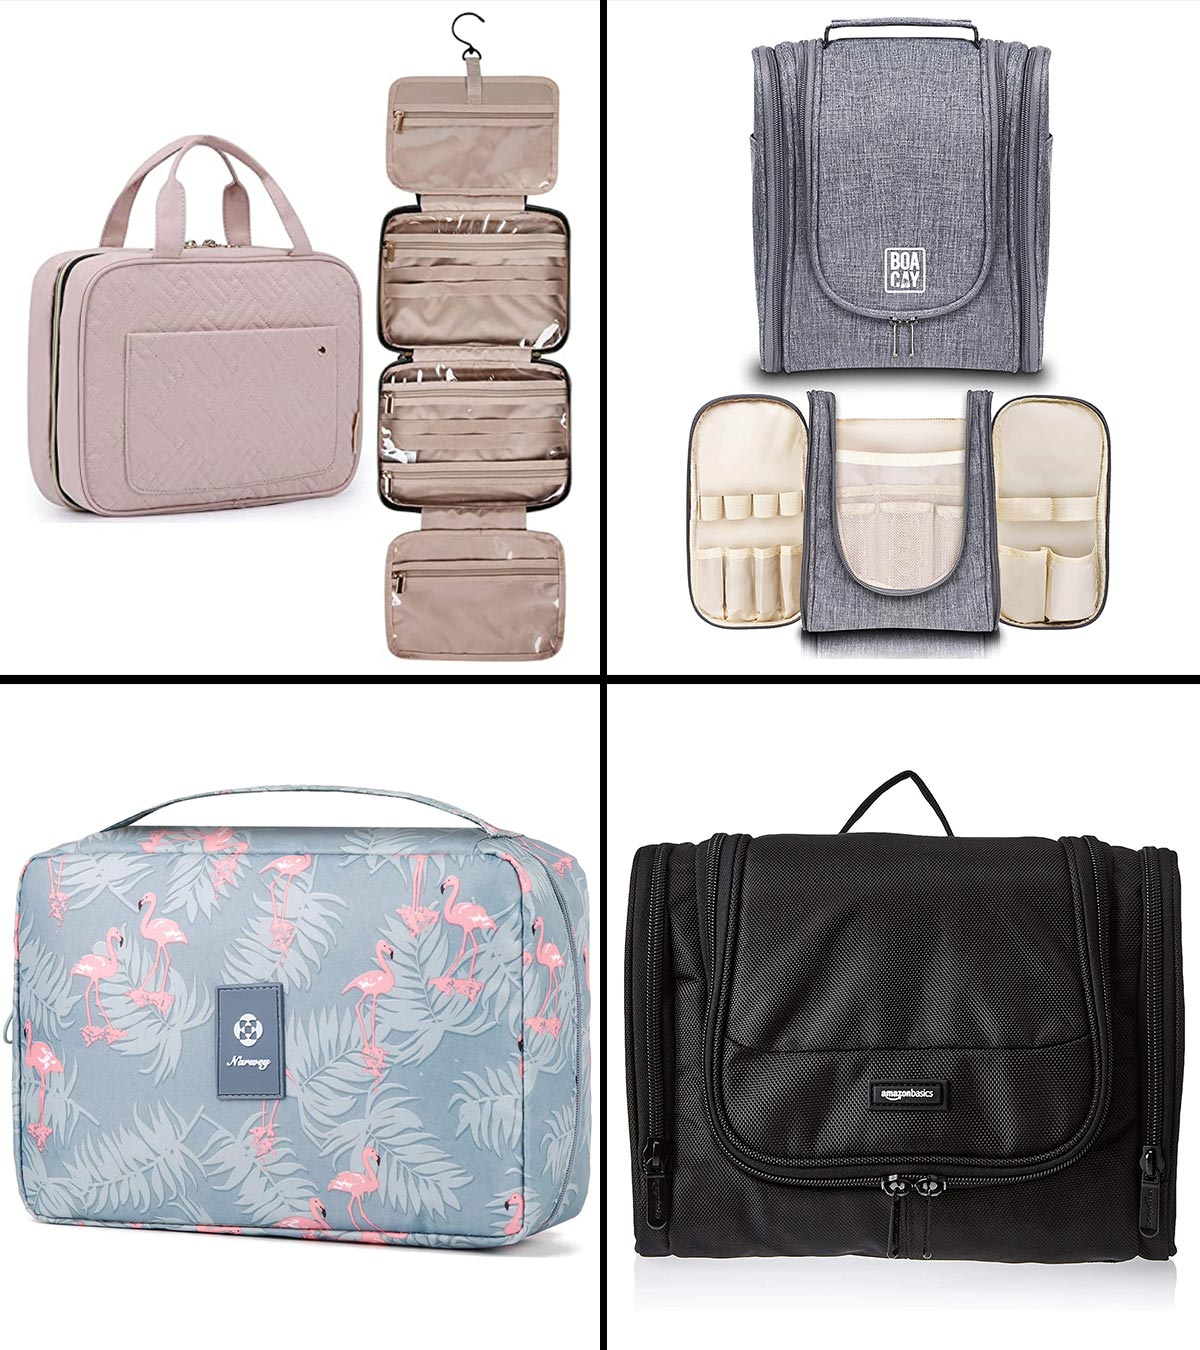 The 11 Best Toiletry Bags for 2023 Travel, According to Reviews